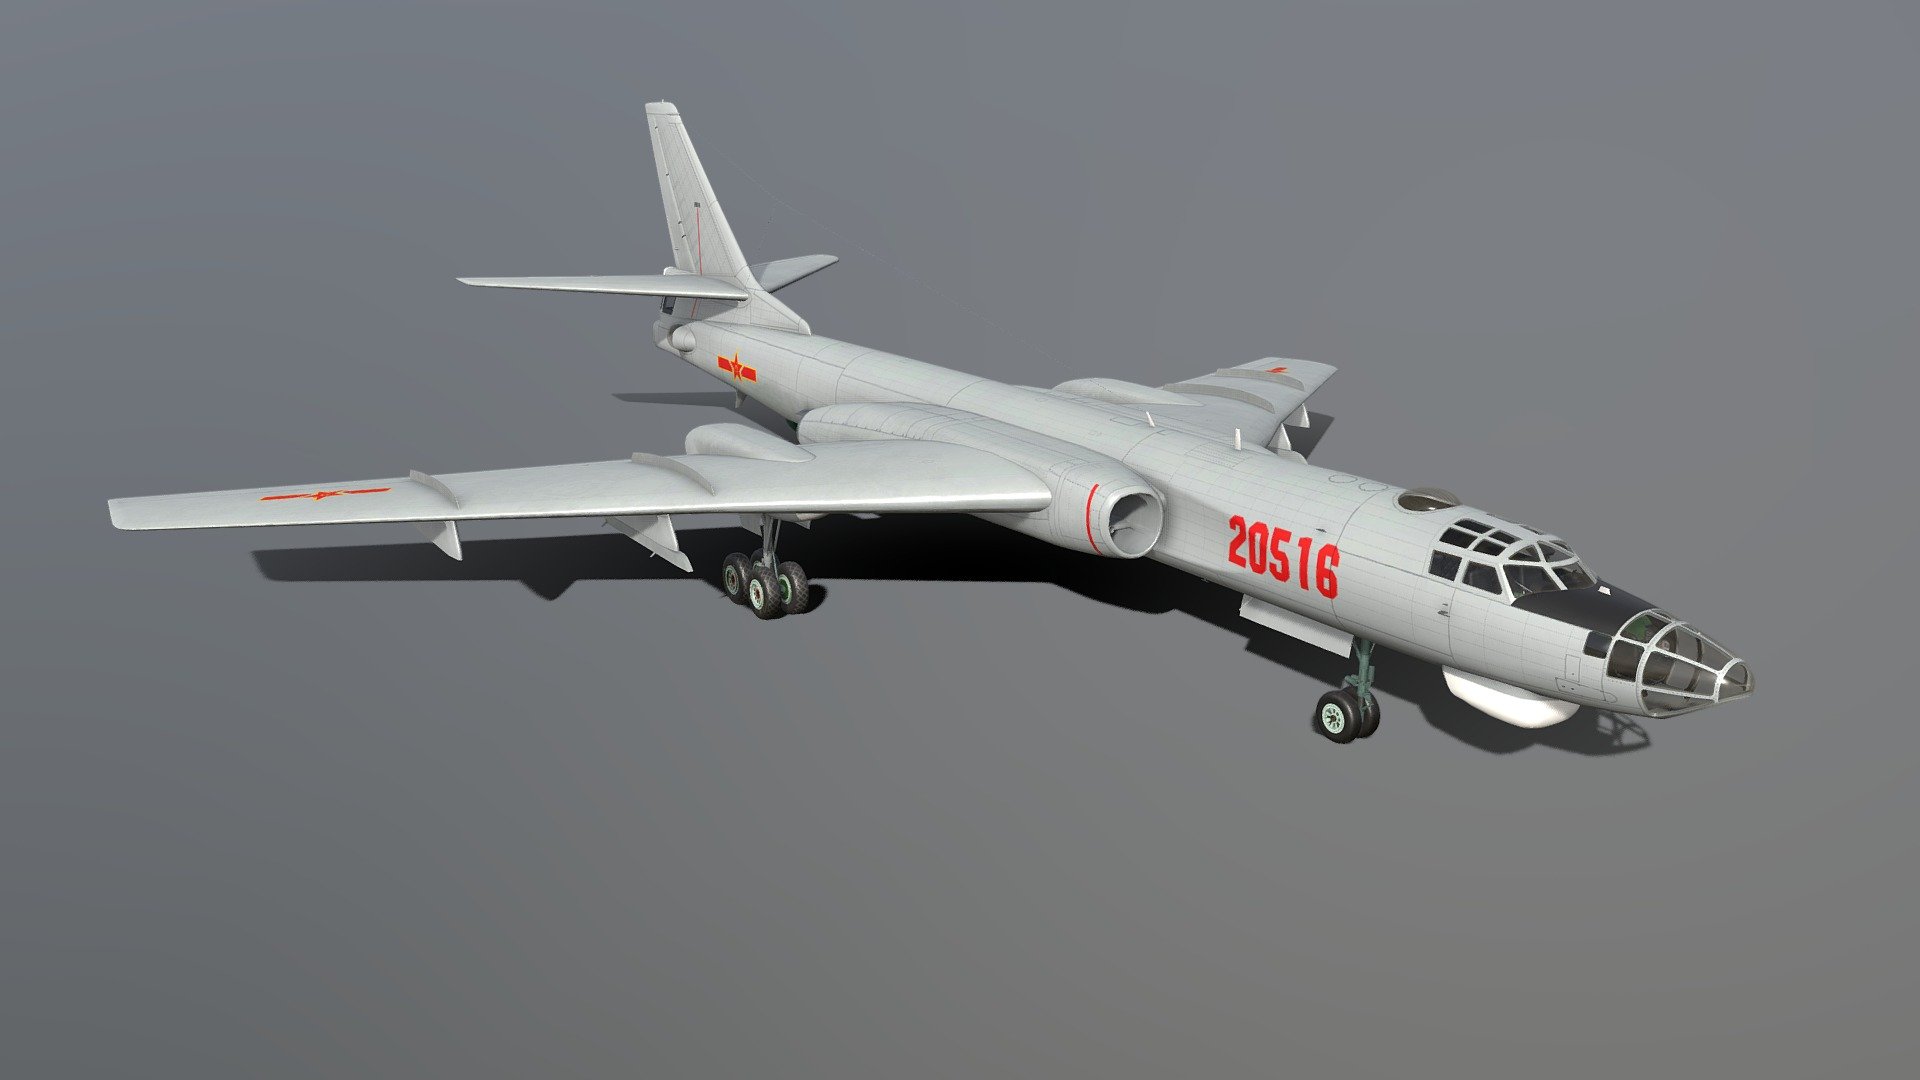 The Xian H-6 is a licence-built version of the Soviet Tupolev Tu-16 twin-engine jet bomber, built for China's People's Liberation Army Air Force (PLAAF).

Delivery of the Tu-16 to China began in 1958, and a licence production agreement with the USSR was signed in the late 1950s. Xi'an Aircraft Industrial Corporation (XAC) manufactured aircraft at Xi'an as the H-6; the first flew in 1959. By November 2020, the PLAAF had as many as 231 3d model